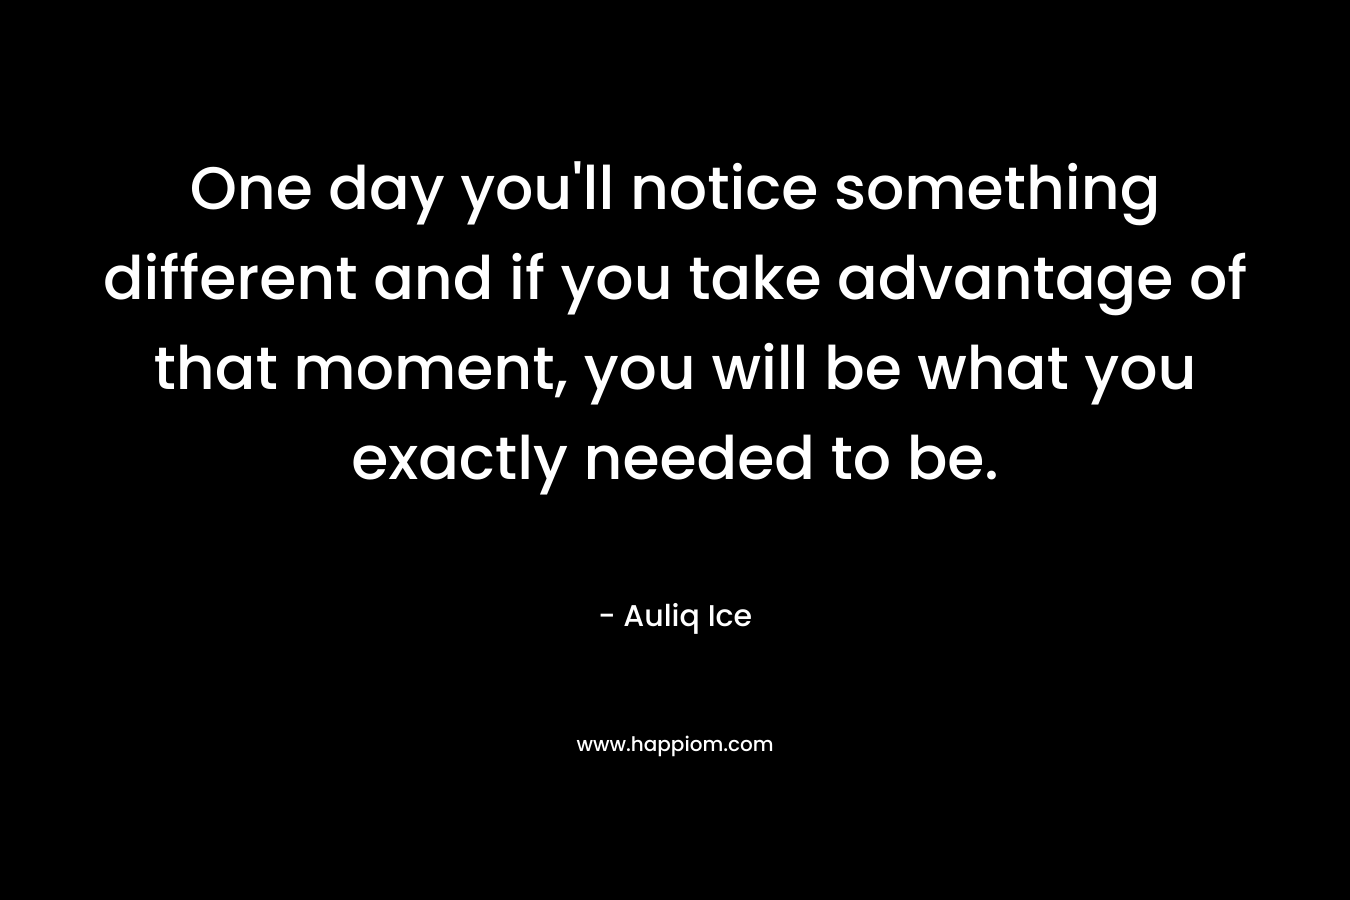 One day you’ll notice something different and if you take advantage of that moment, you will be what you exactly needed to be. – Auliq Ice